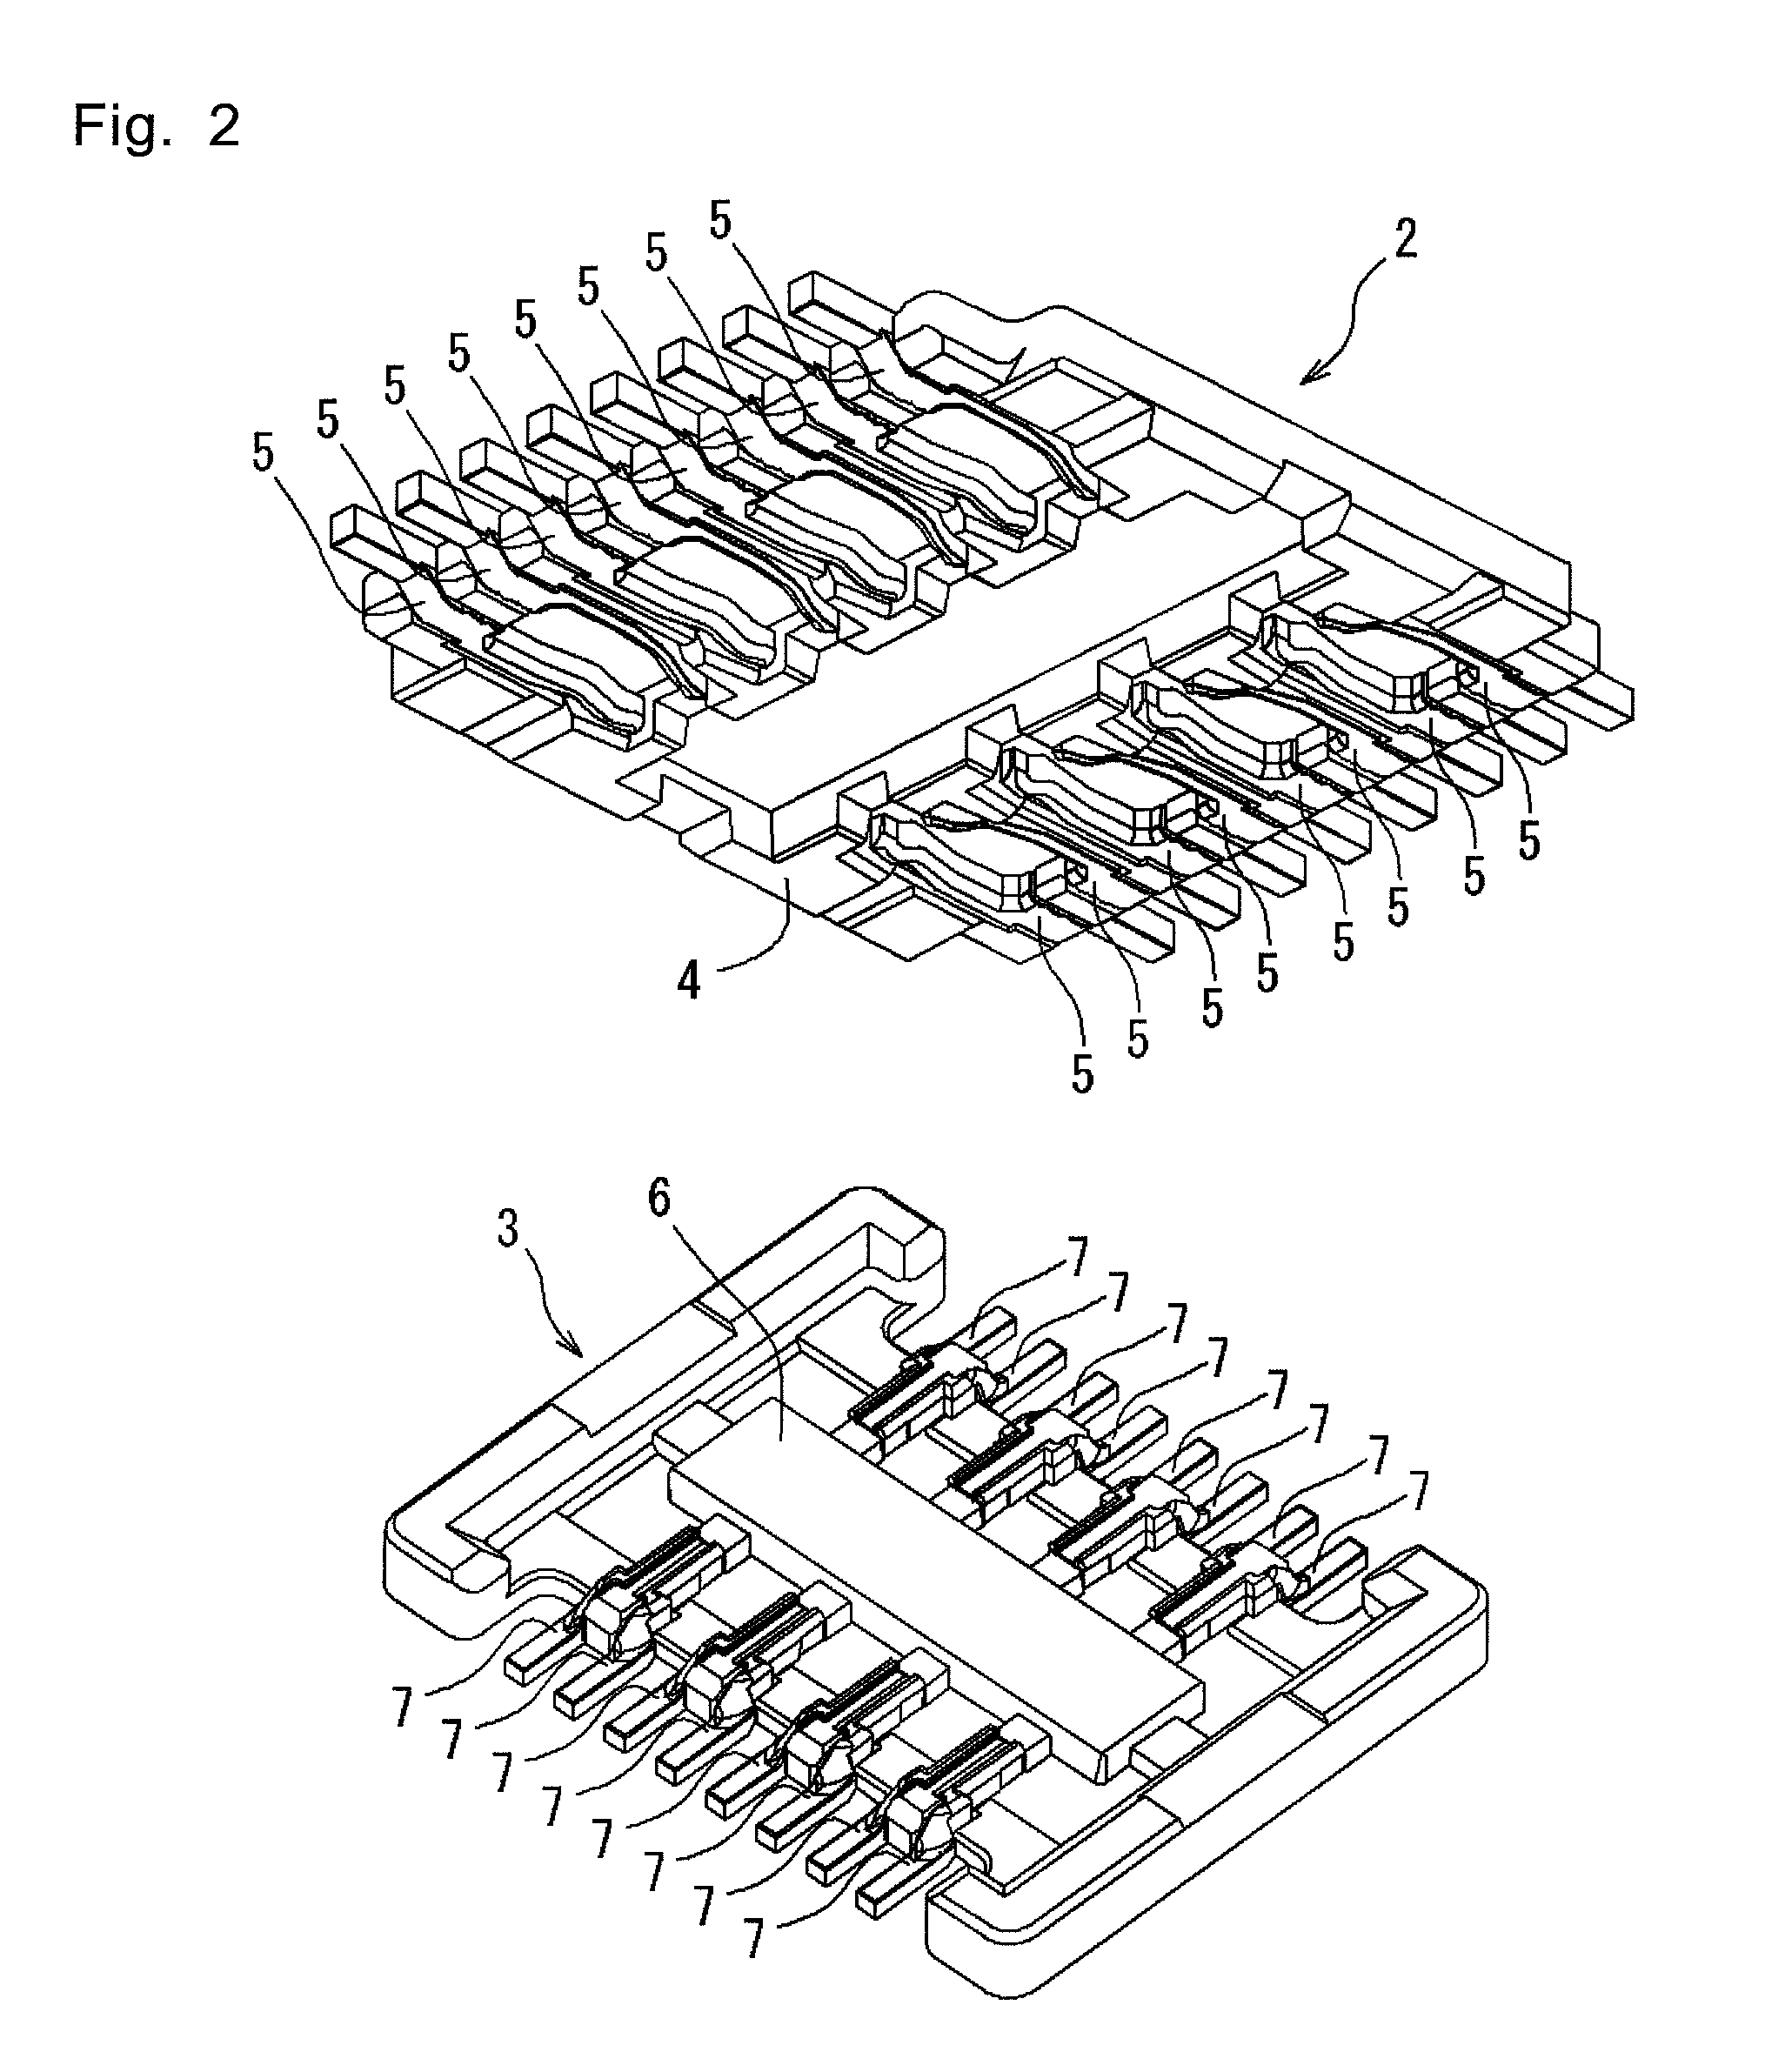 Contacts formed by electroforming and extended in direction roughly perpendicular to voltage application direction in electroperforming